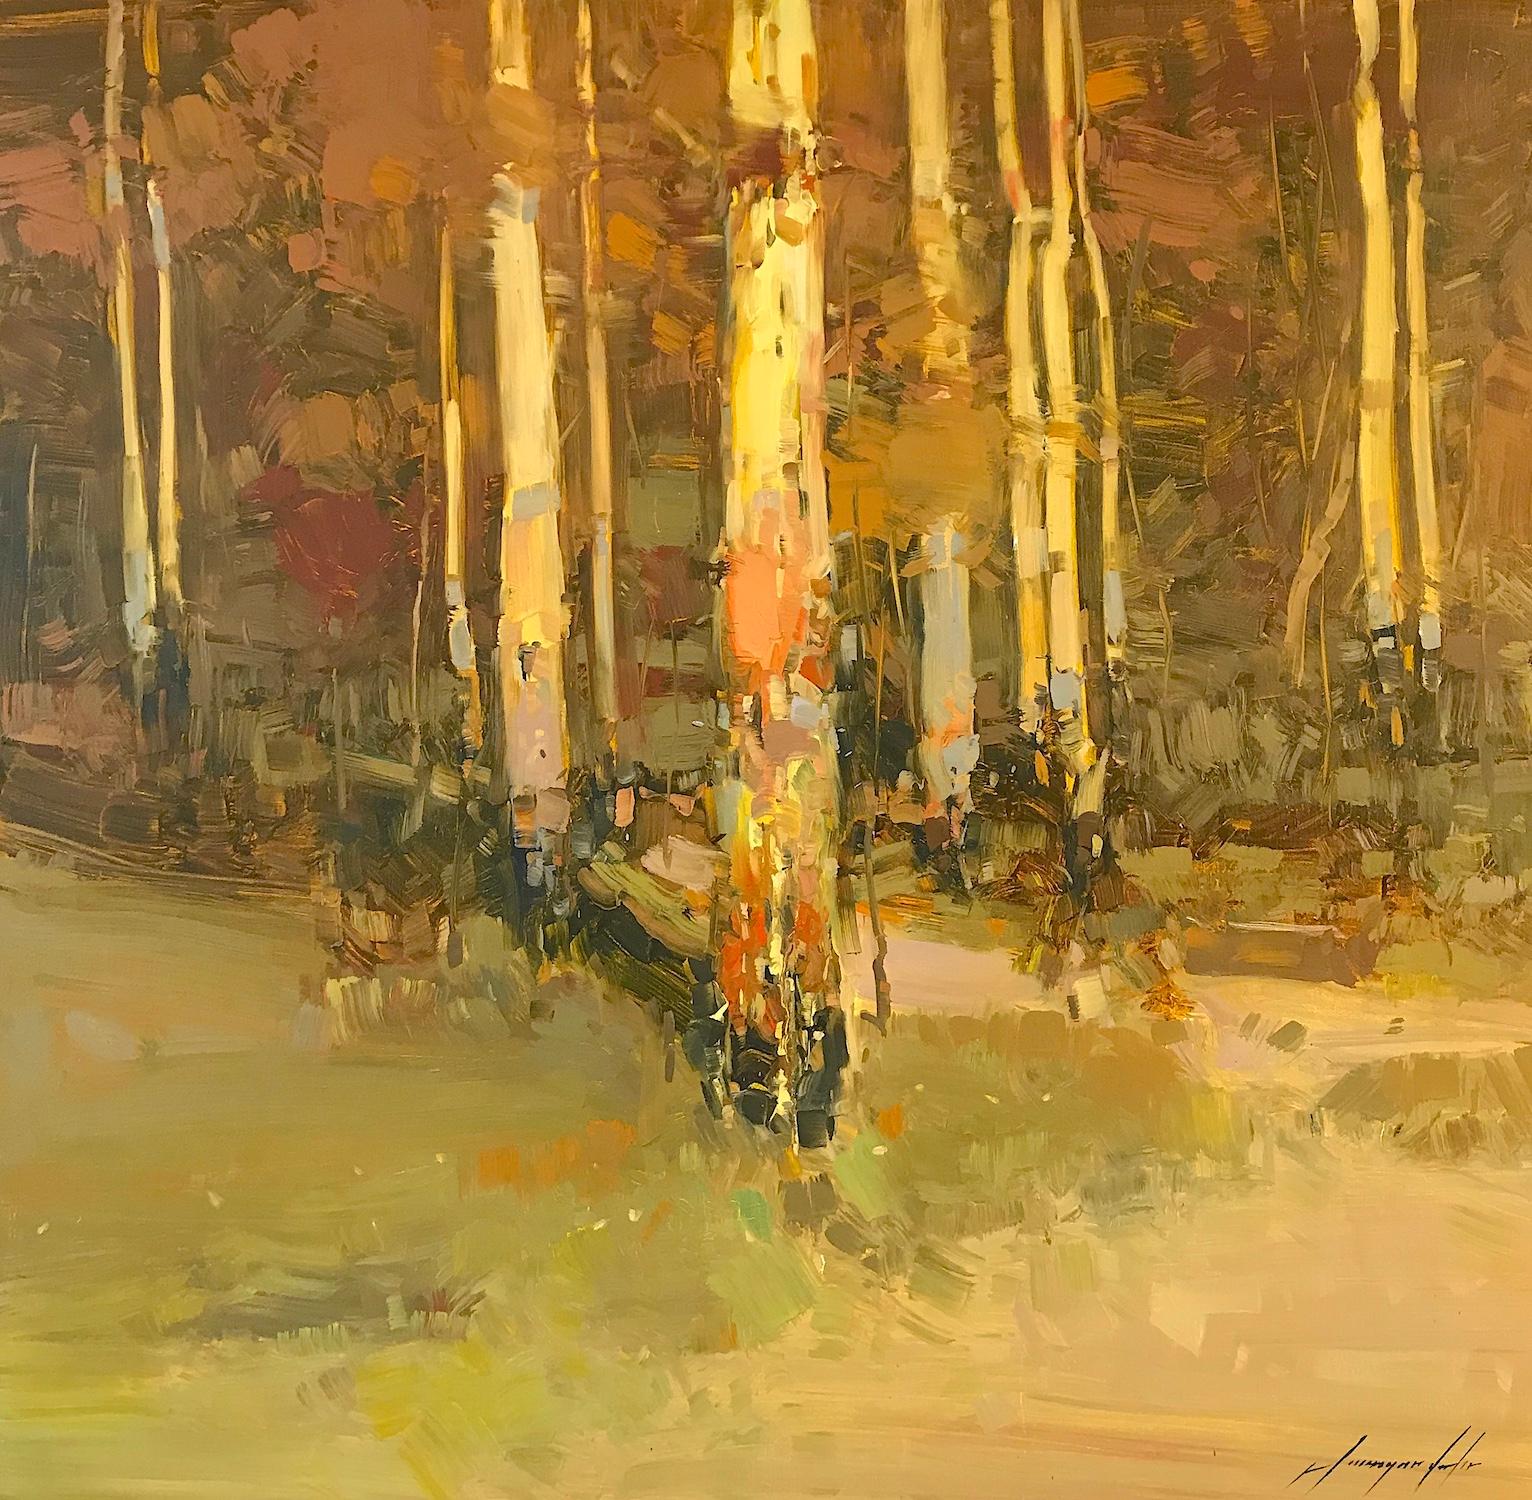 Vahe Yeremyan Landscape Painting - Birches Trees, Original Oil Painting, One of a Kind